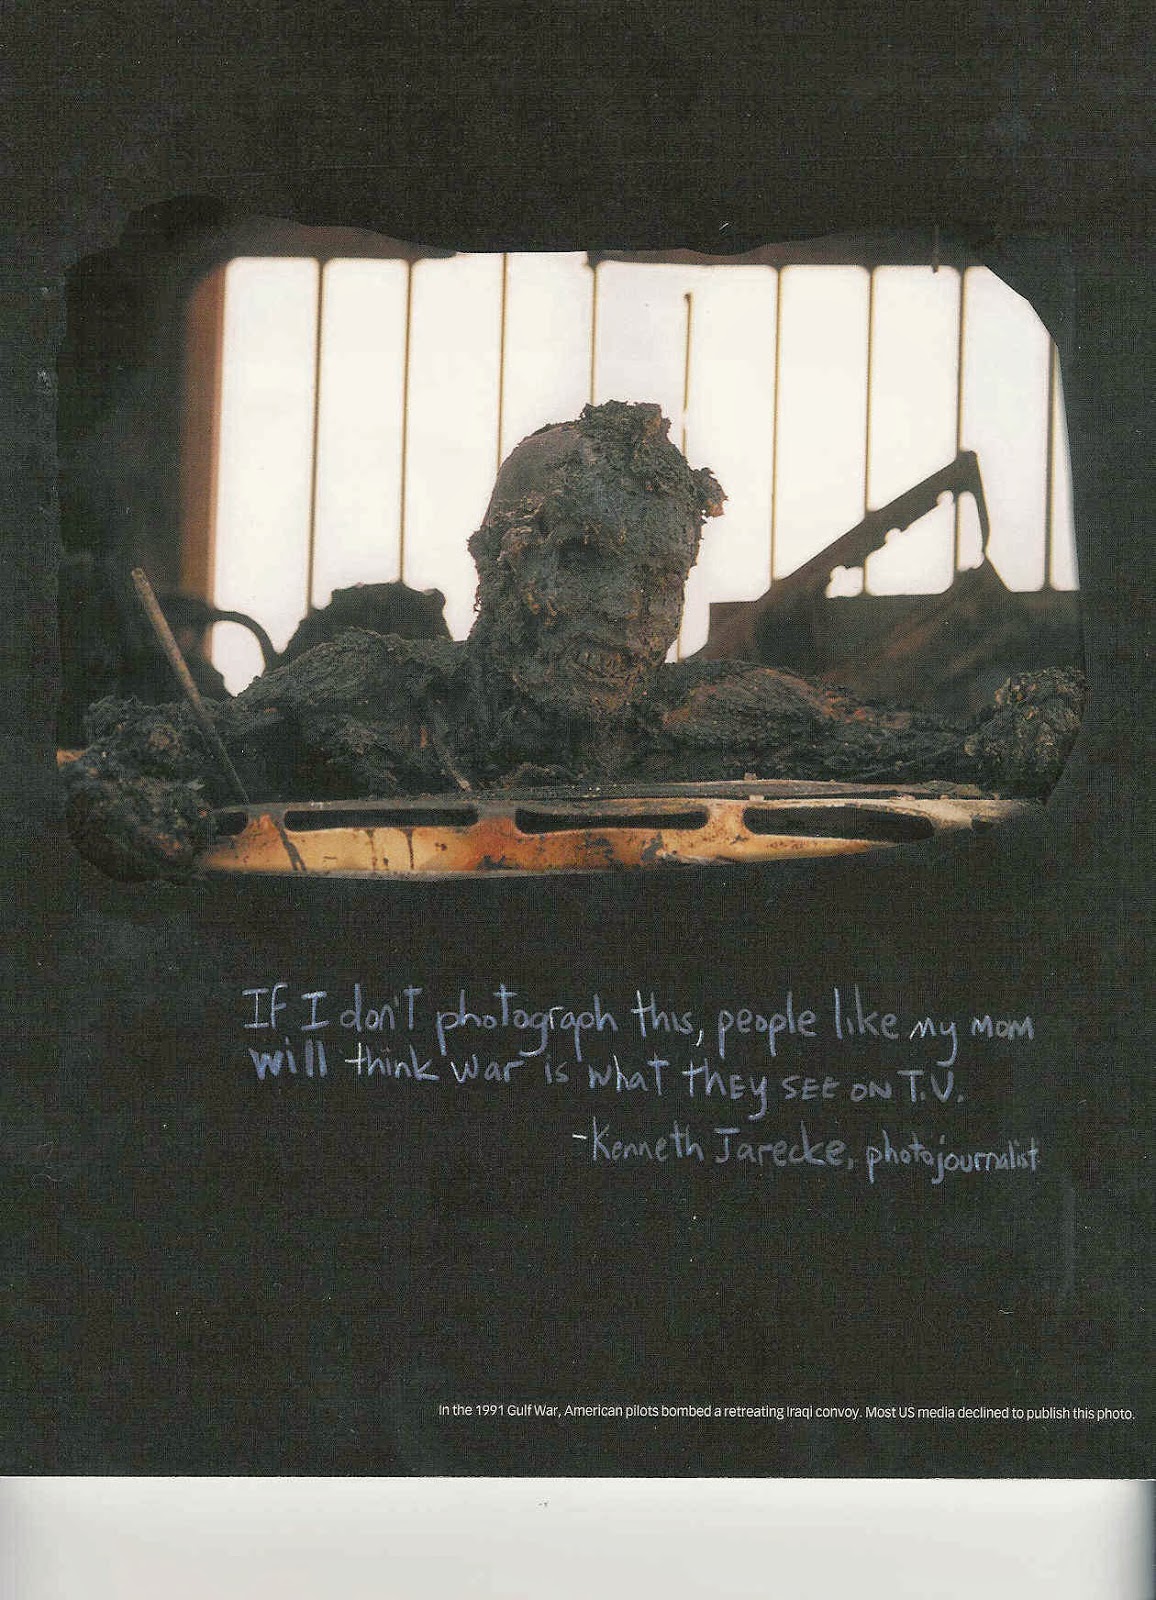 The+Death+of+an+Iraqi+soldier,+Highway+of+Death,+1991.jpg